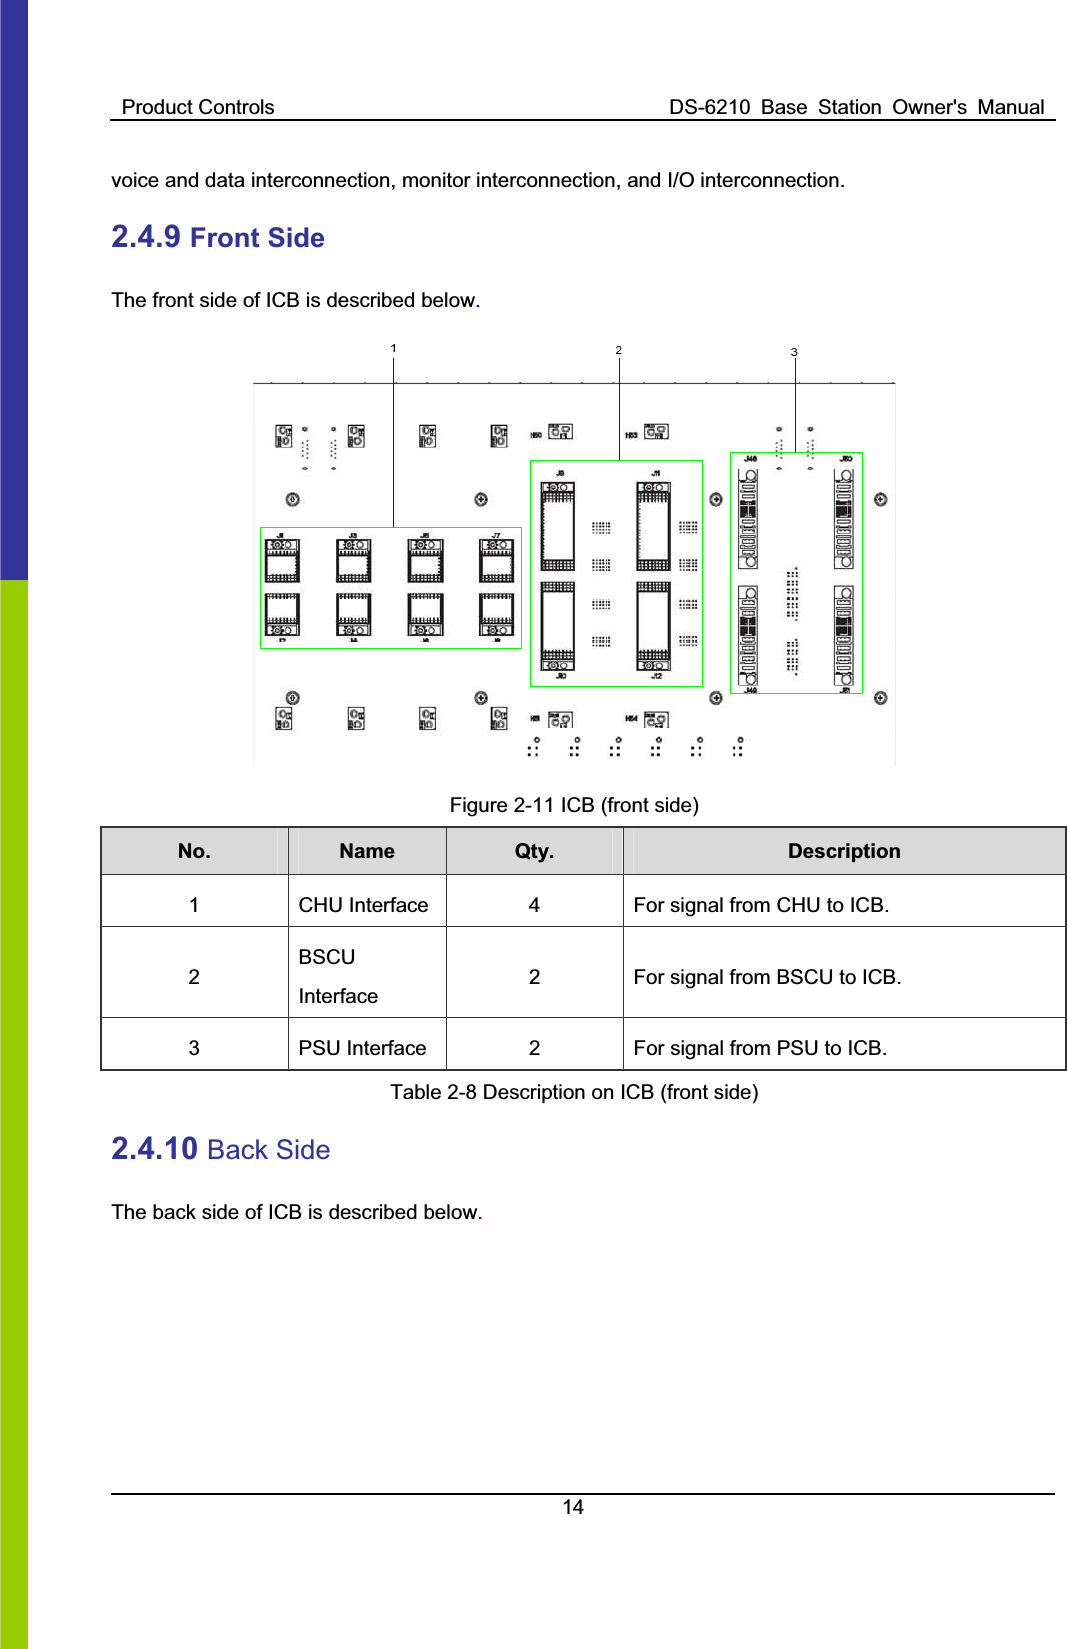 Product Controls  DS-6210  Base  Station  Owner&apos;s  Manual14voice and data interconnection, monitor interconnection, and I/O interconnection.   2.4.9 Front Side The front side of ICB is described below.Figure 2-11 ICB (front side) No. Name    Qty.  Description 1  CHU Interface  4  For signal from CHU to ICB. 2BSCUInterface2  For signal from BSCU to ICB. 3  PSU Interface  2  For signal from PSU to ICB. Table 2-8 Description on ICB (front side) 2.4.10 Back Side The back side of ICB is described below.